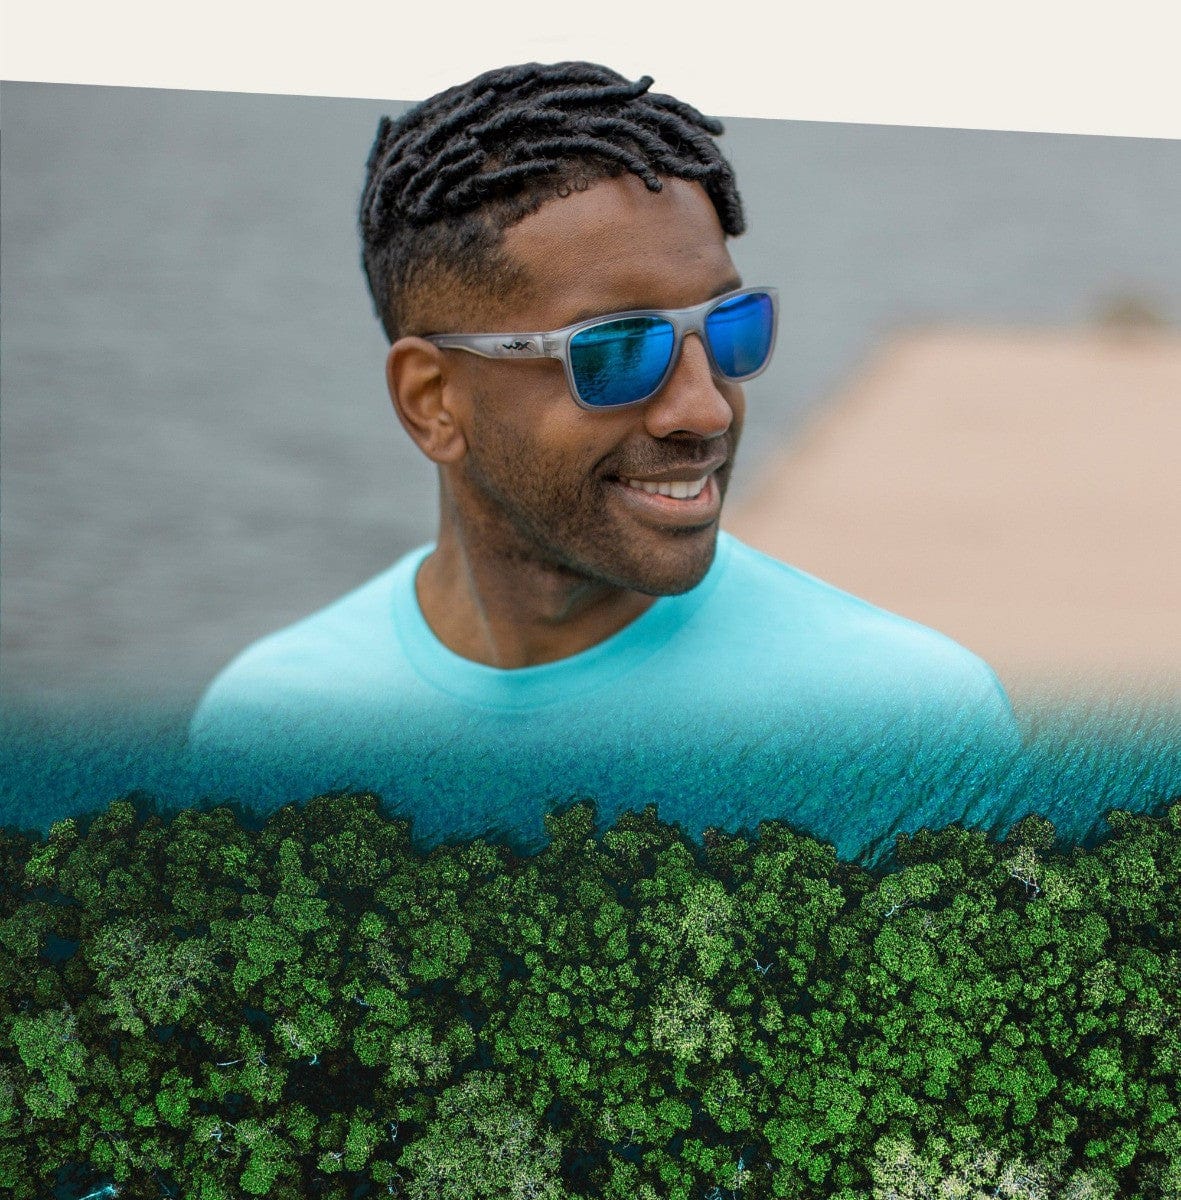 Wiley X Ovation Safety Sunglasses with Matte Slate Frame and Captivate Polarized Blue Mirror Lens on an adventure